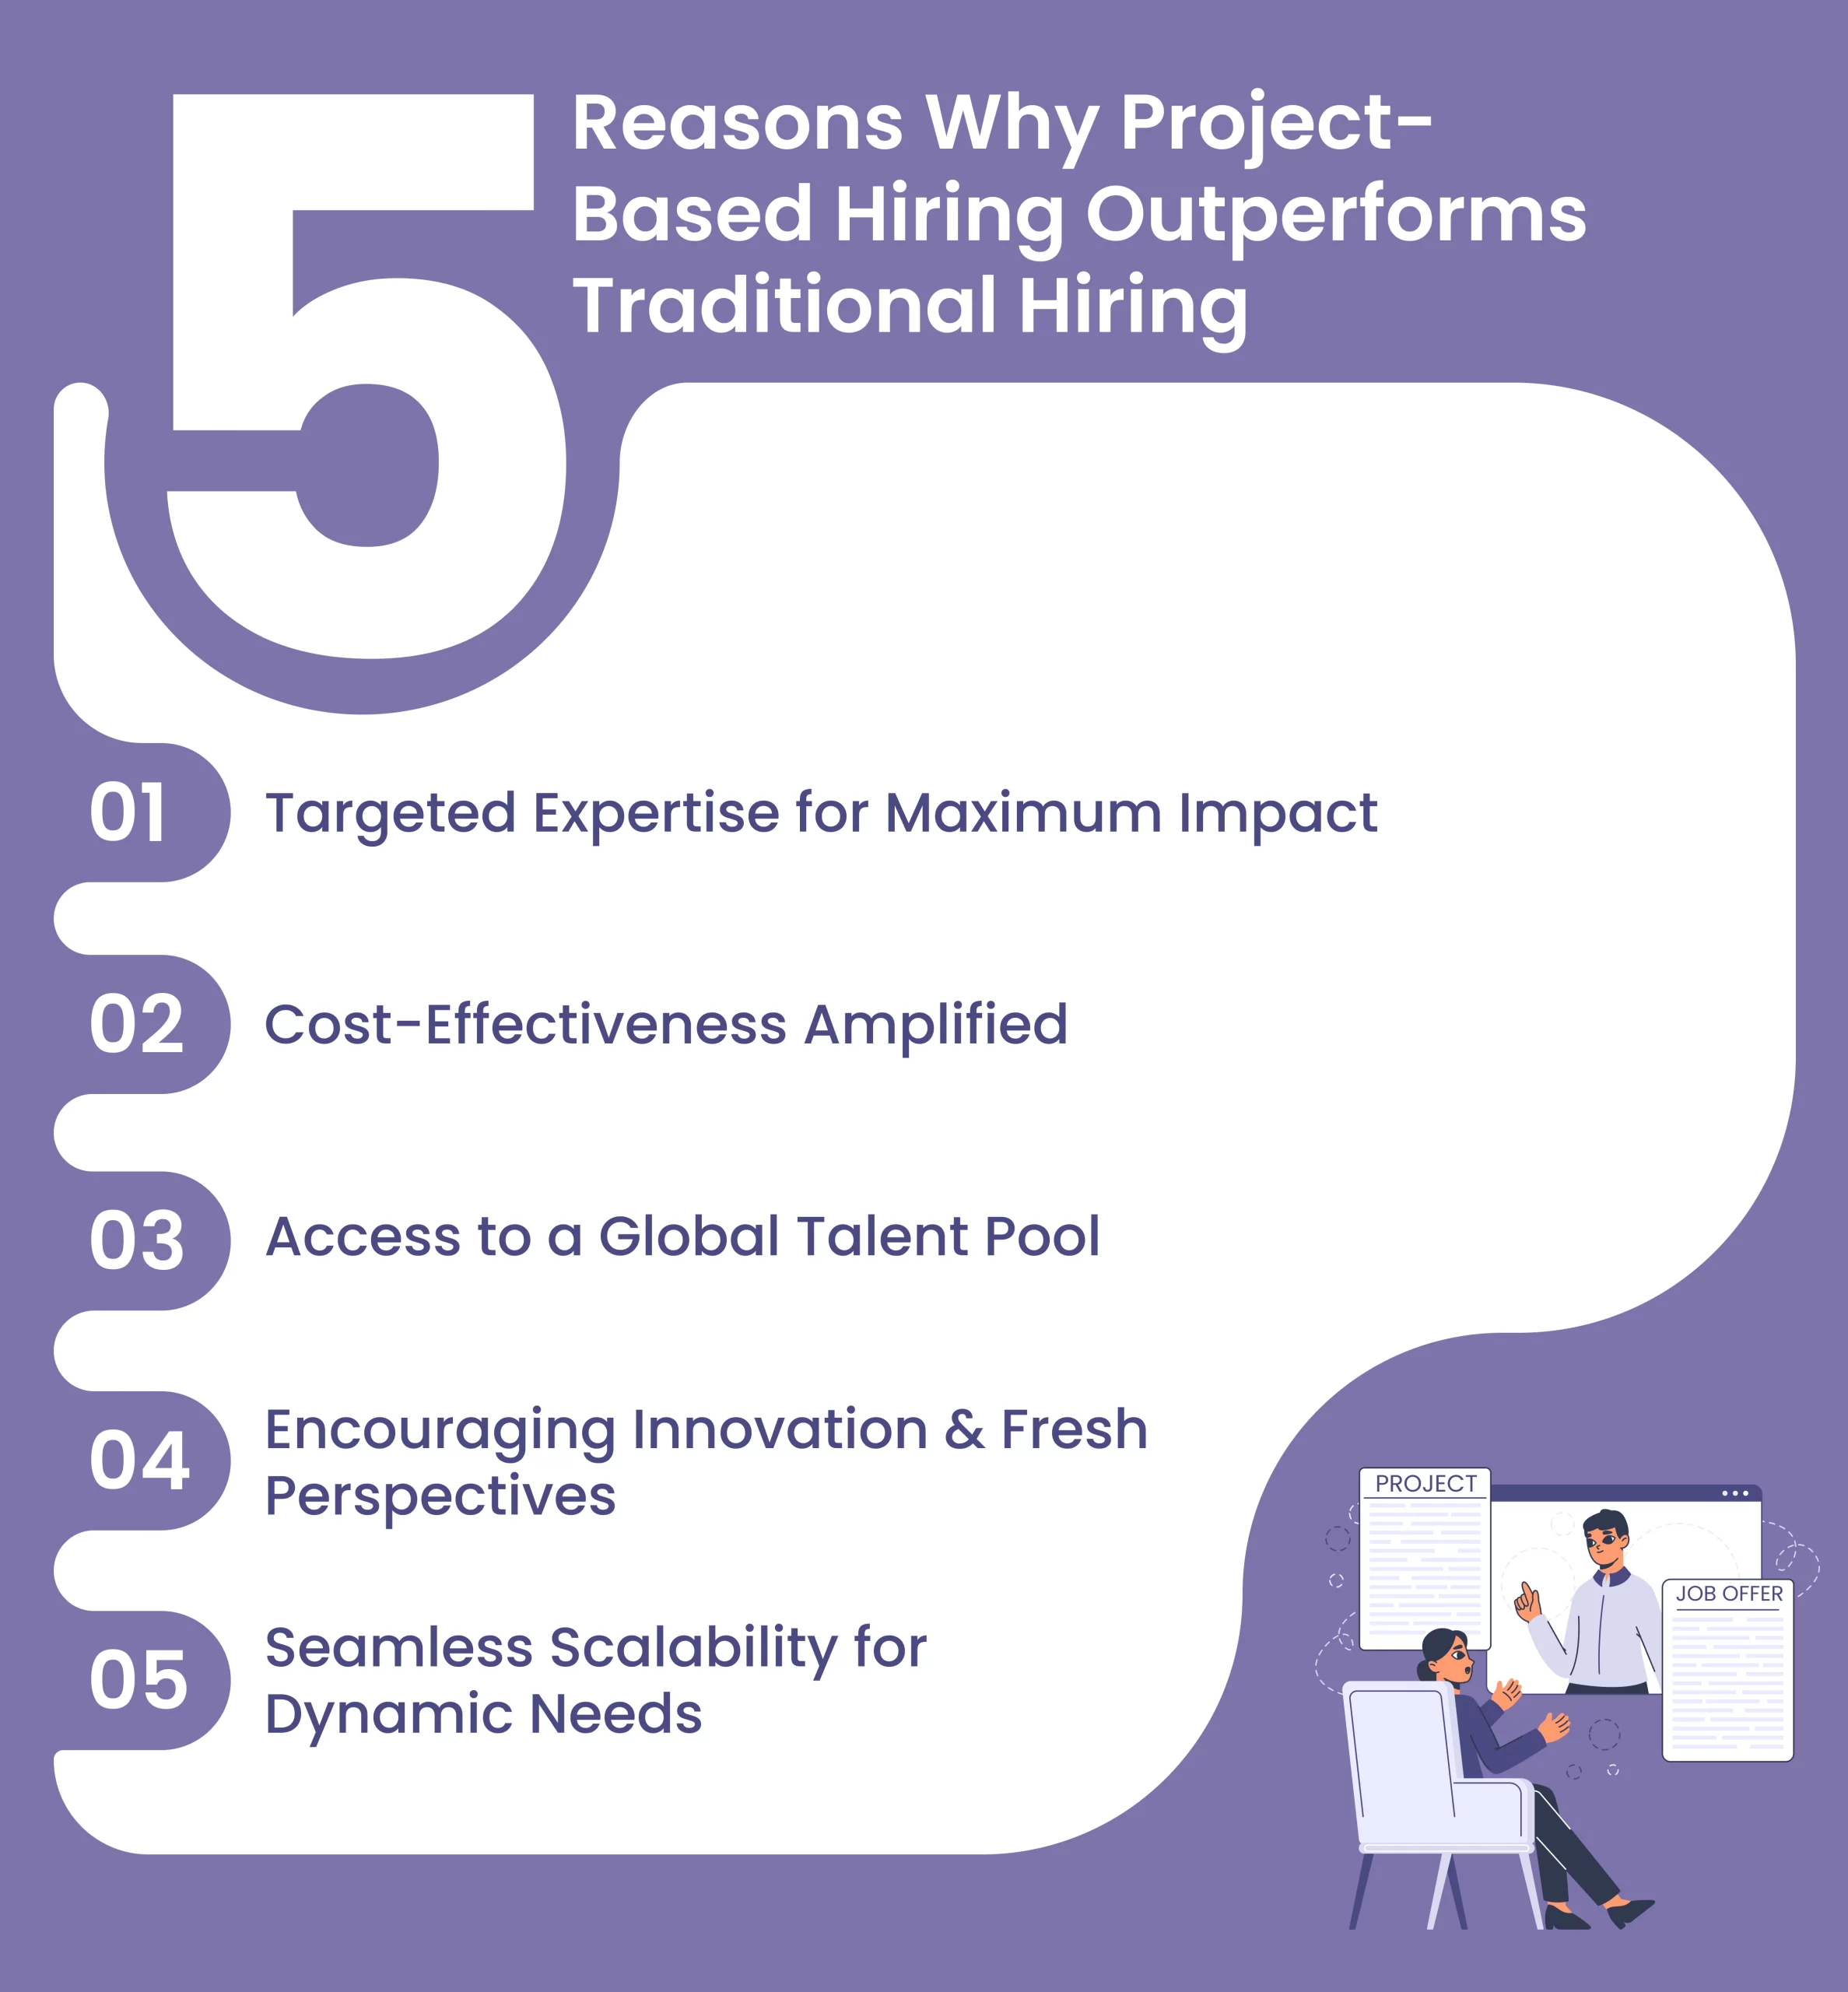 5 Reasons Why Project-Based Hiring Outperforms Traditional Hiring